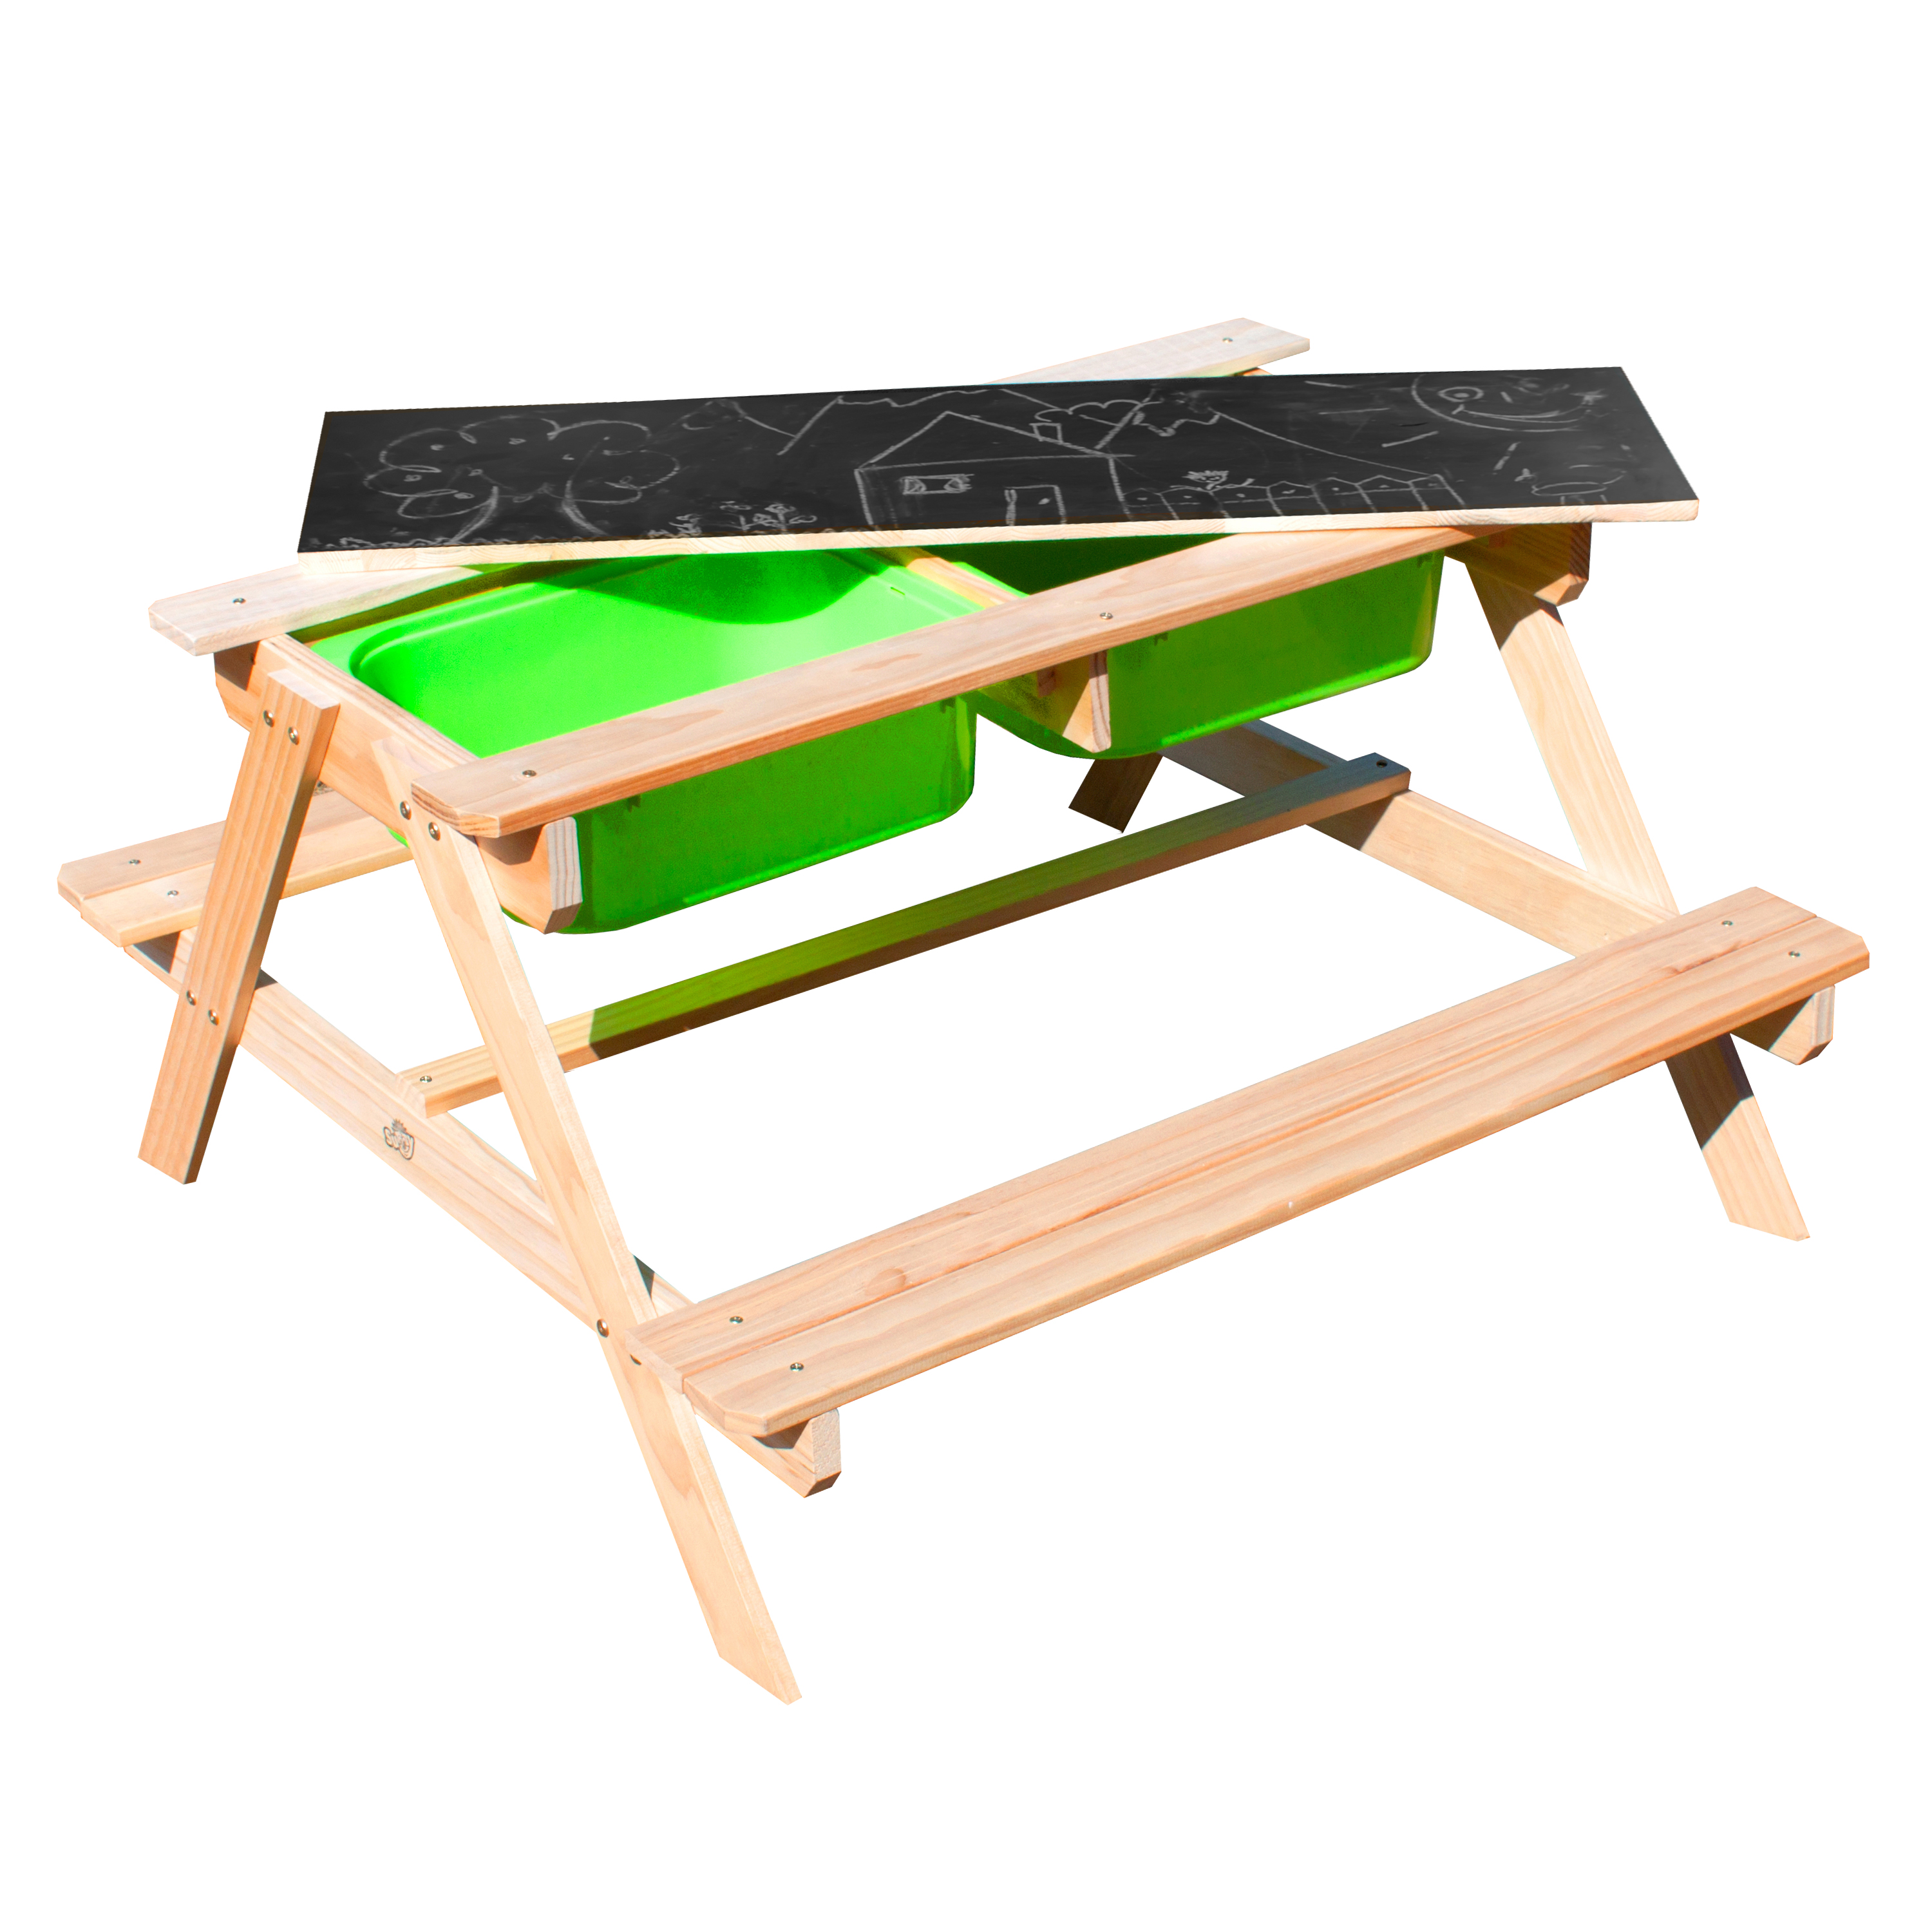 Dual Top 2.0 Sand & Water Picnic Table with Green Bins